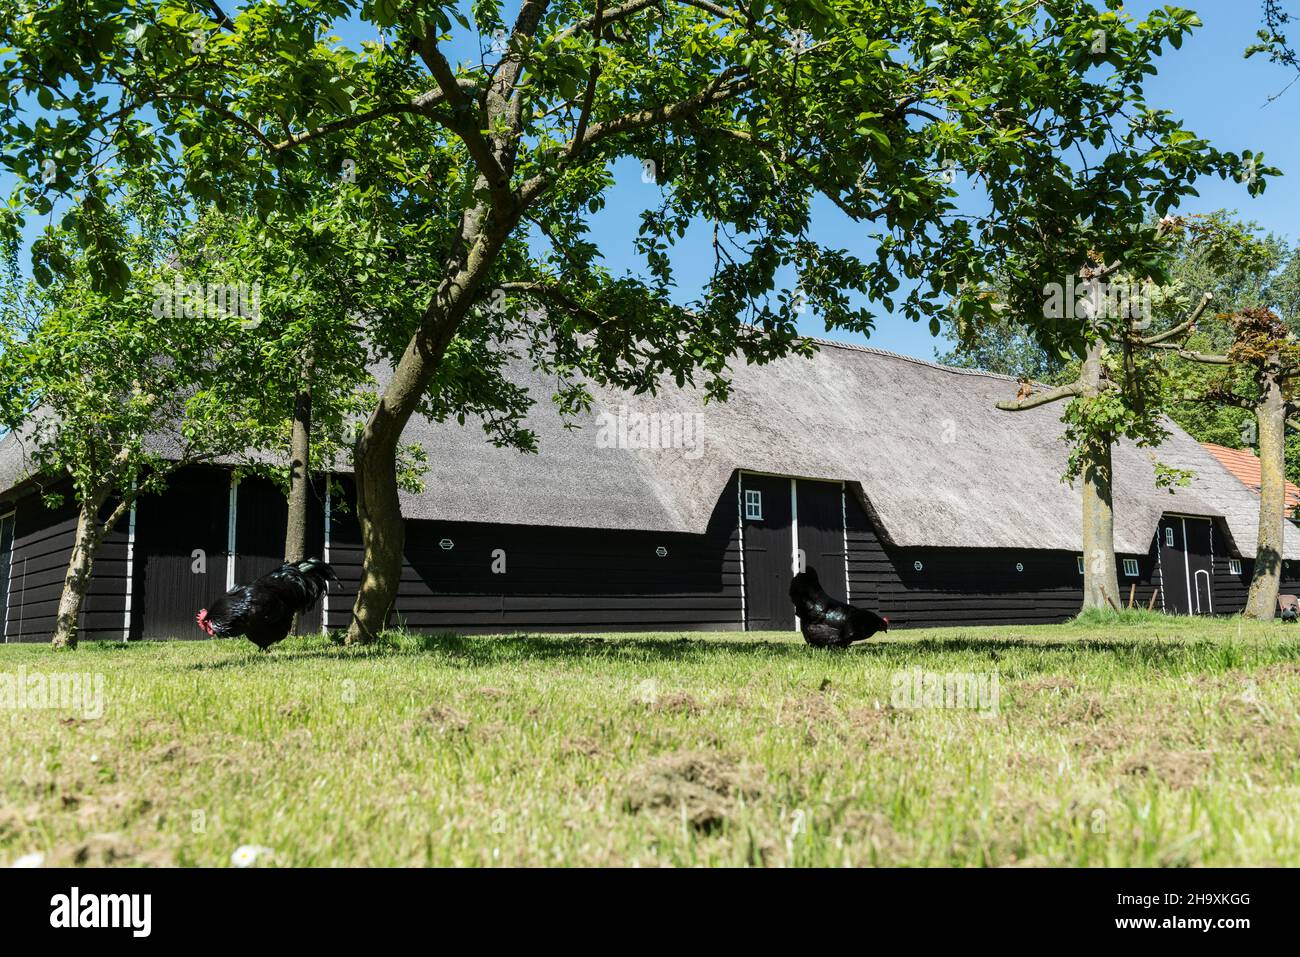 Typical traditional black wooden farmers barn with thatched roof in Zuid-Beveland, Zeeland, Netherlands Stock Photo